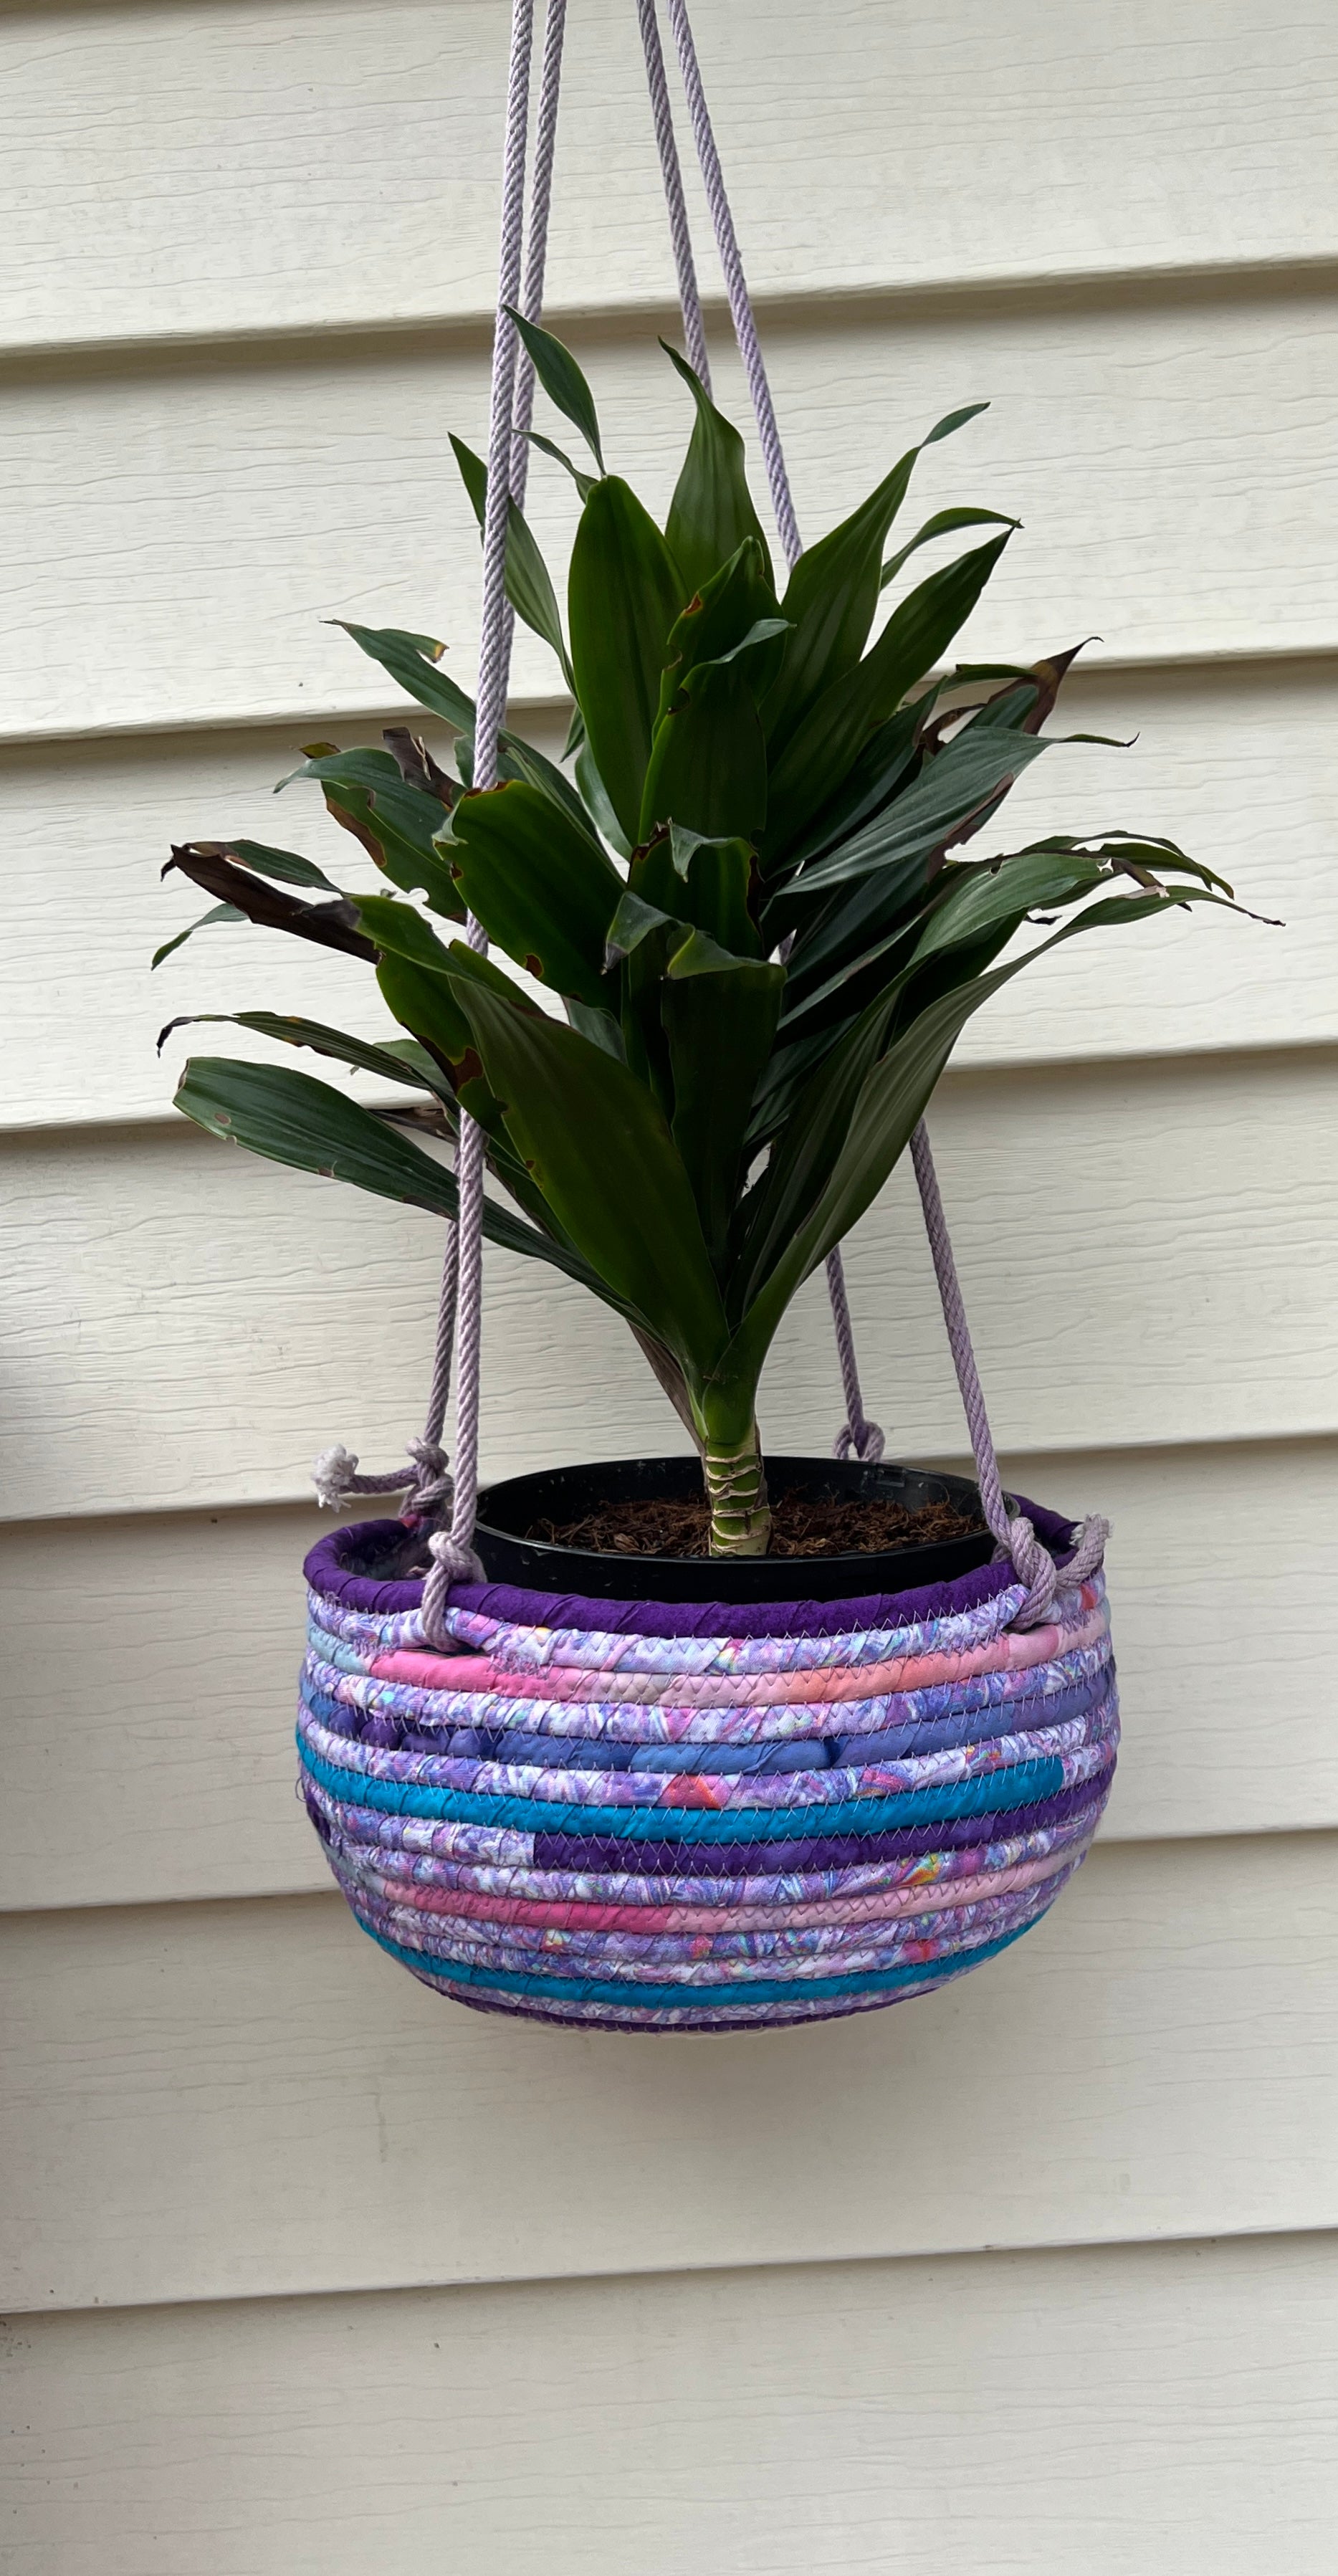 Coiled Rope Hanging Planter Basket Pastels in Turquoise Pink and Purples